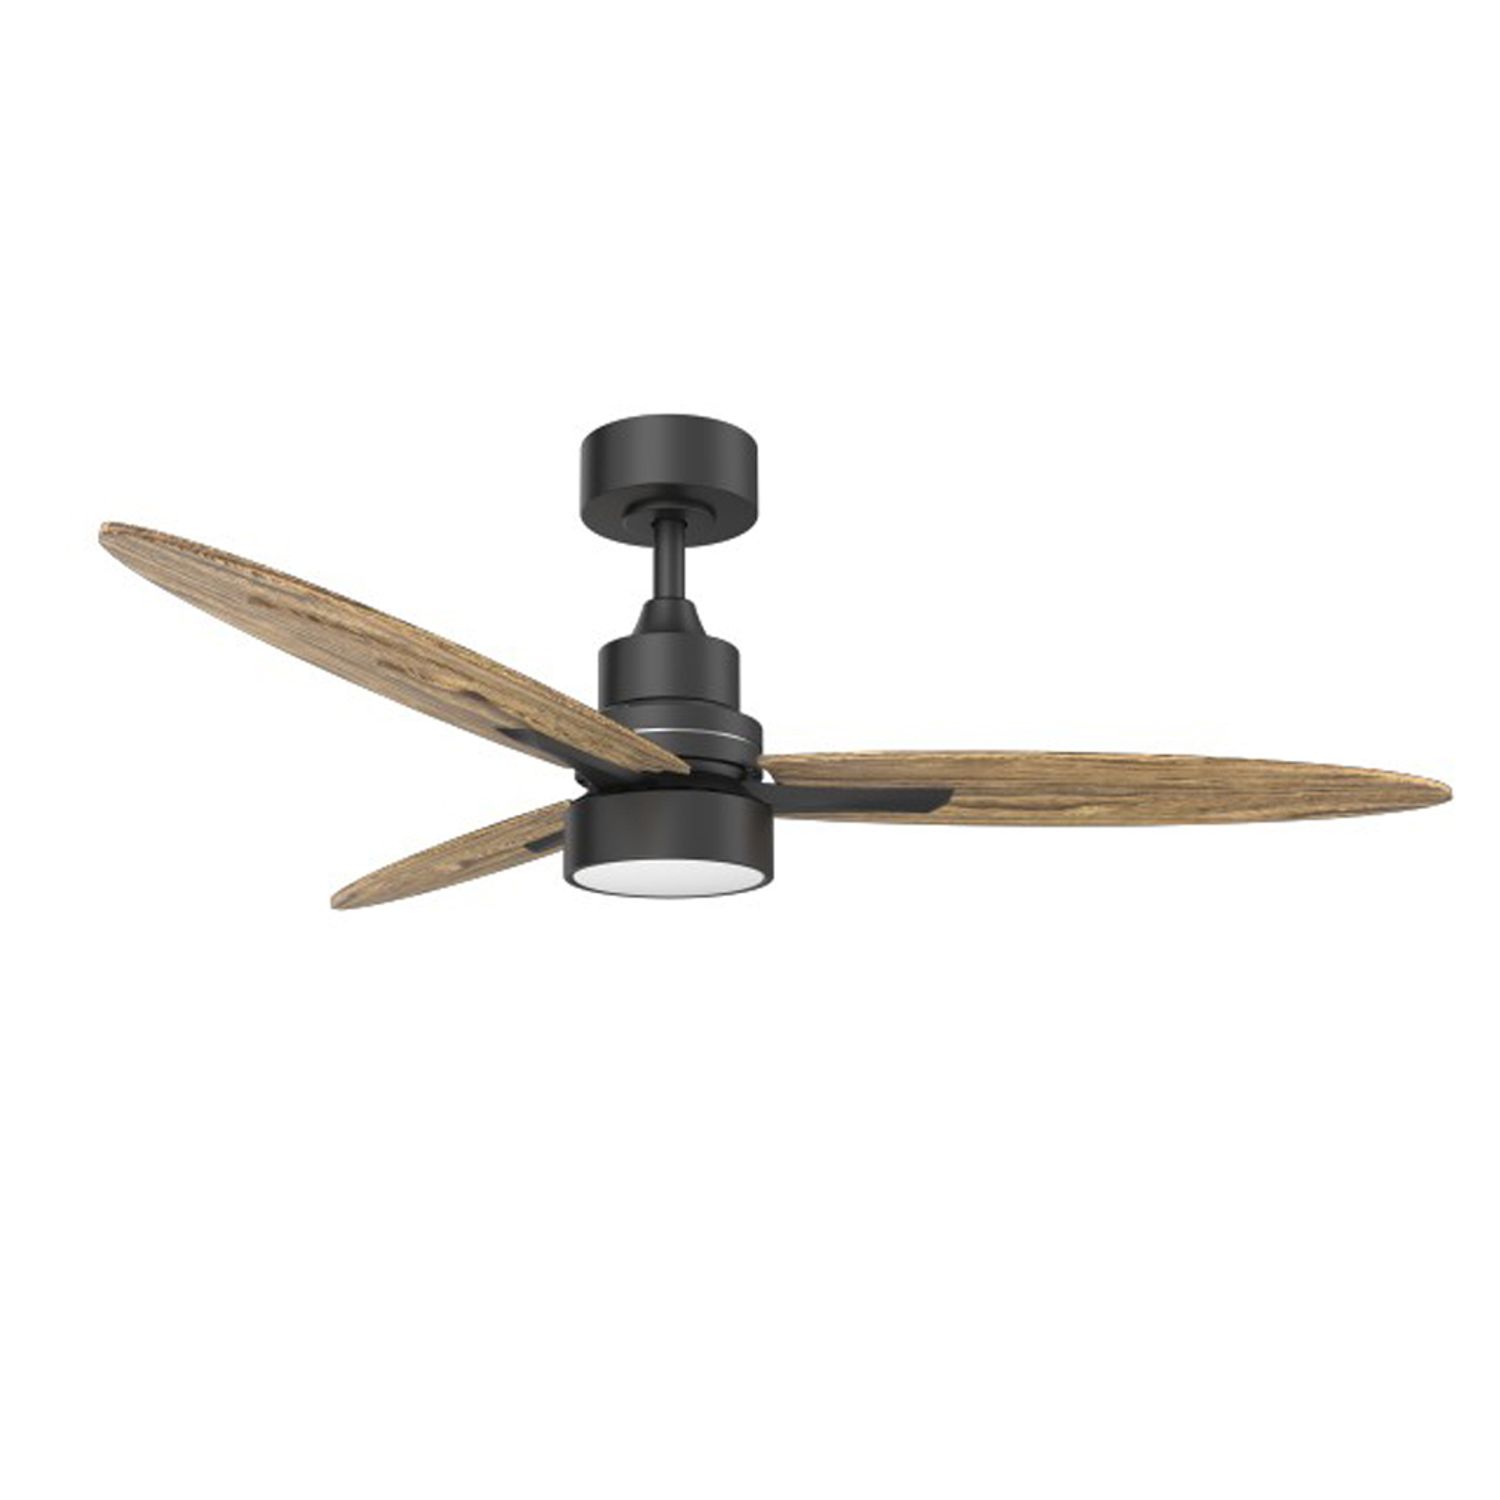 KBS wholesale Black and Wooden Design Ceiling Fan with Light, Reverse Function & Remote Control